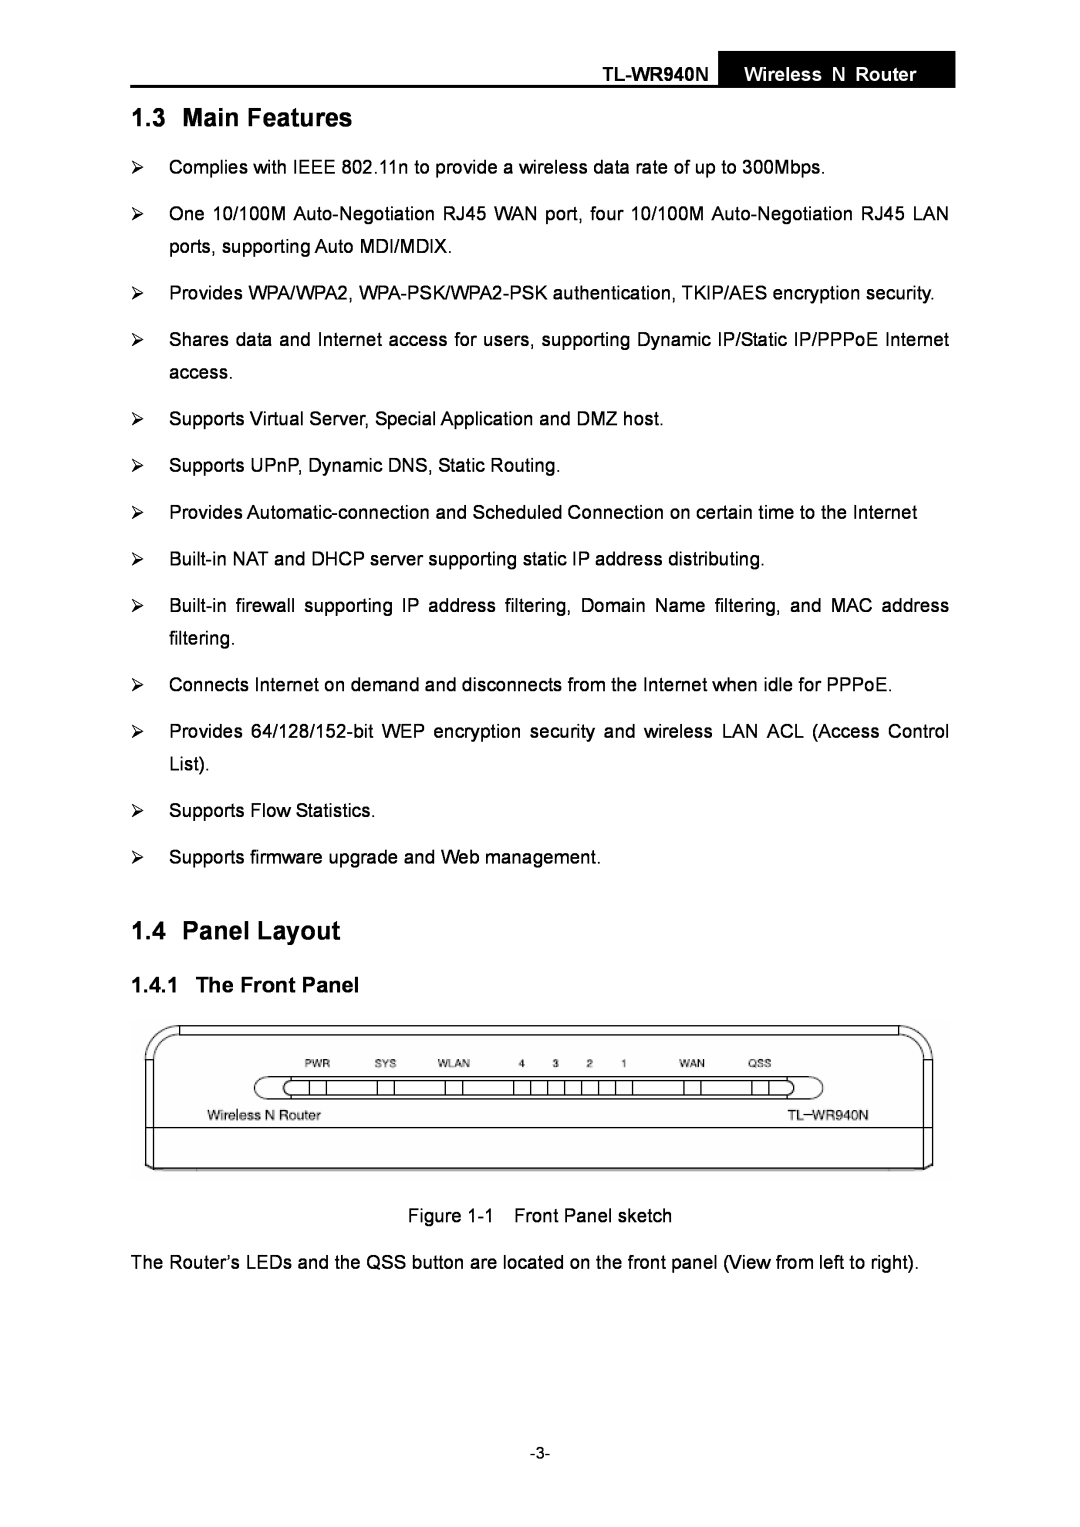 TP-Link manual Main Features, Panel Layout, The Front Panel, TL-WR940N Wireless N Router 